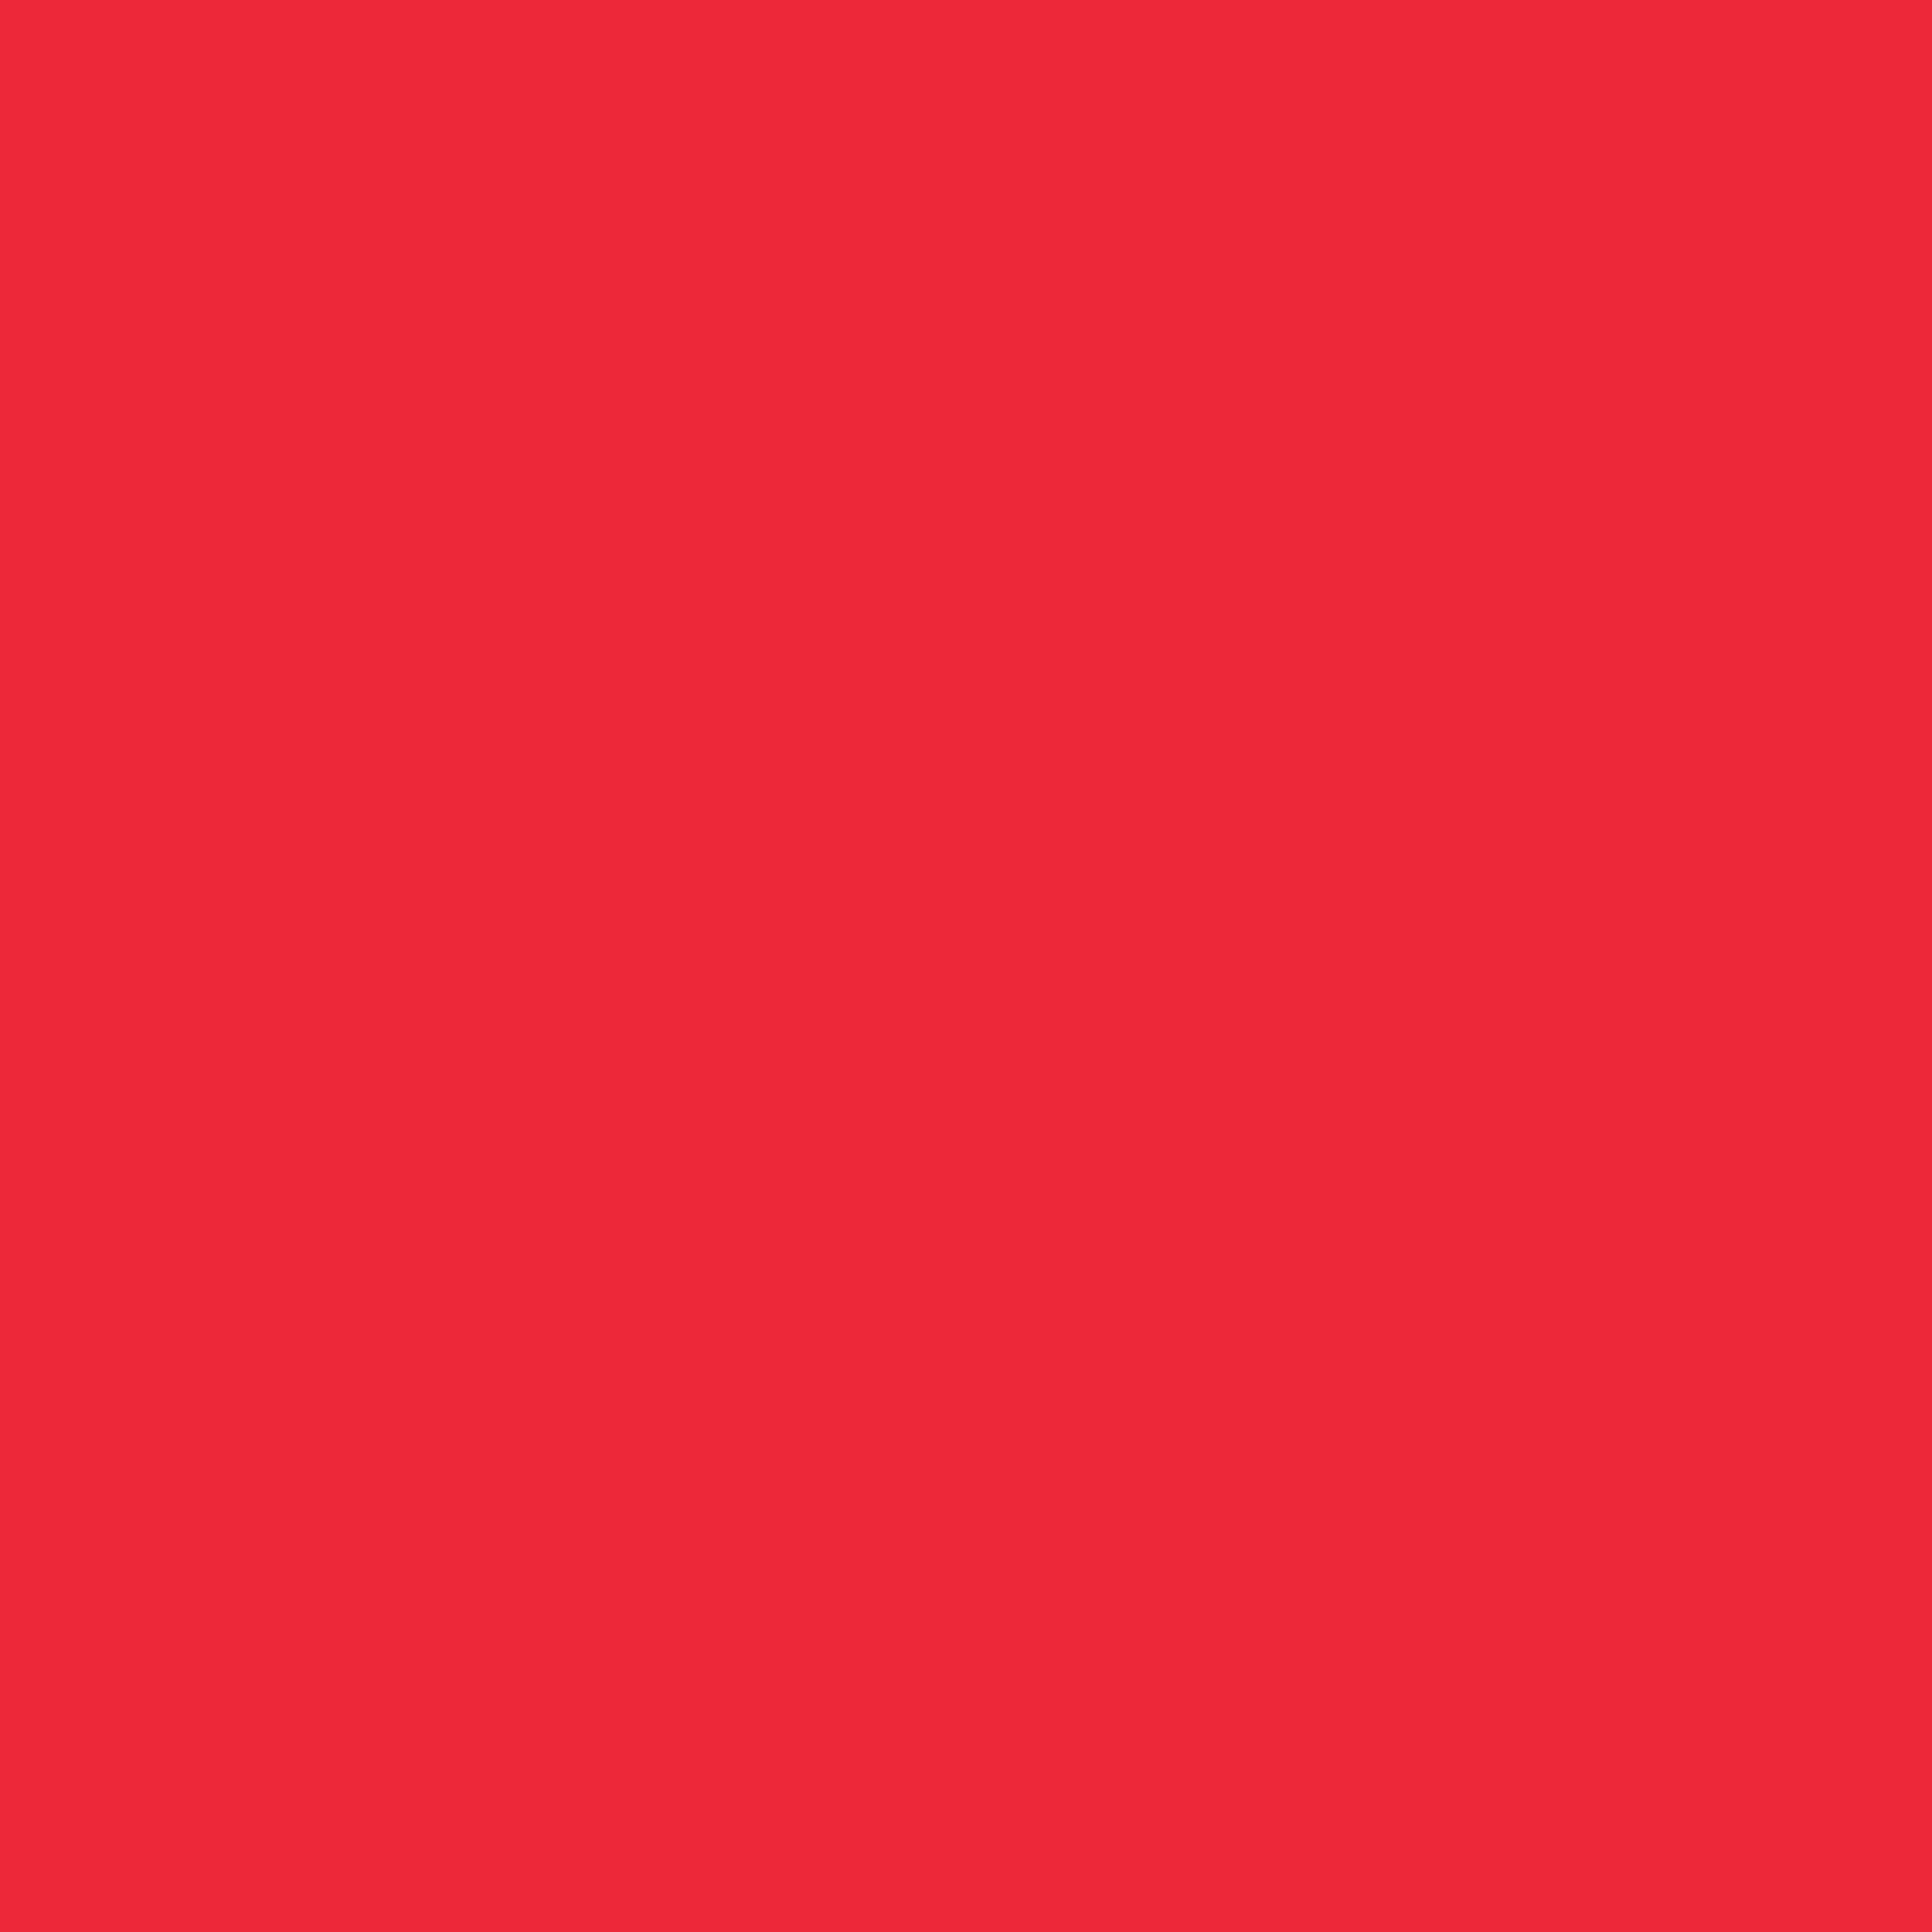 3600x3600 Red Pantone Solid Color Background